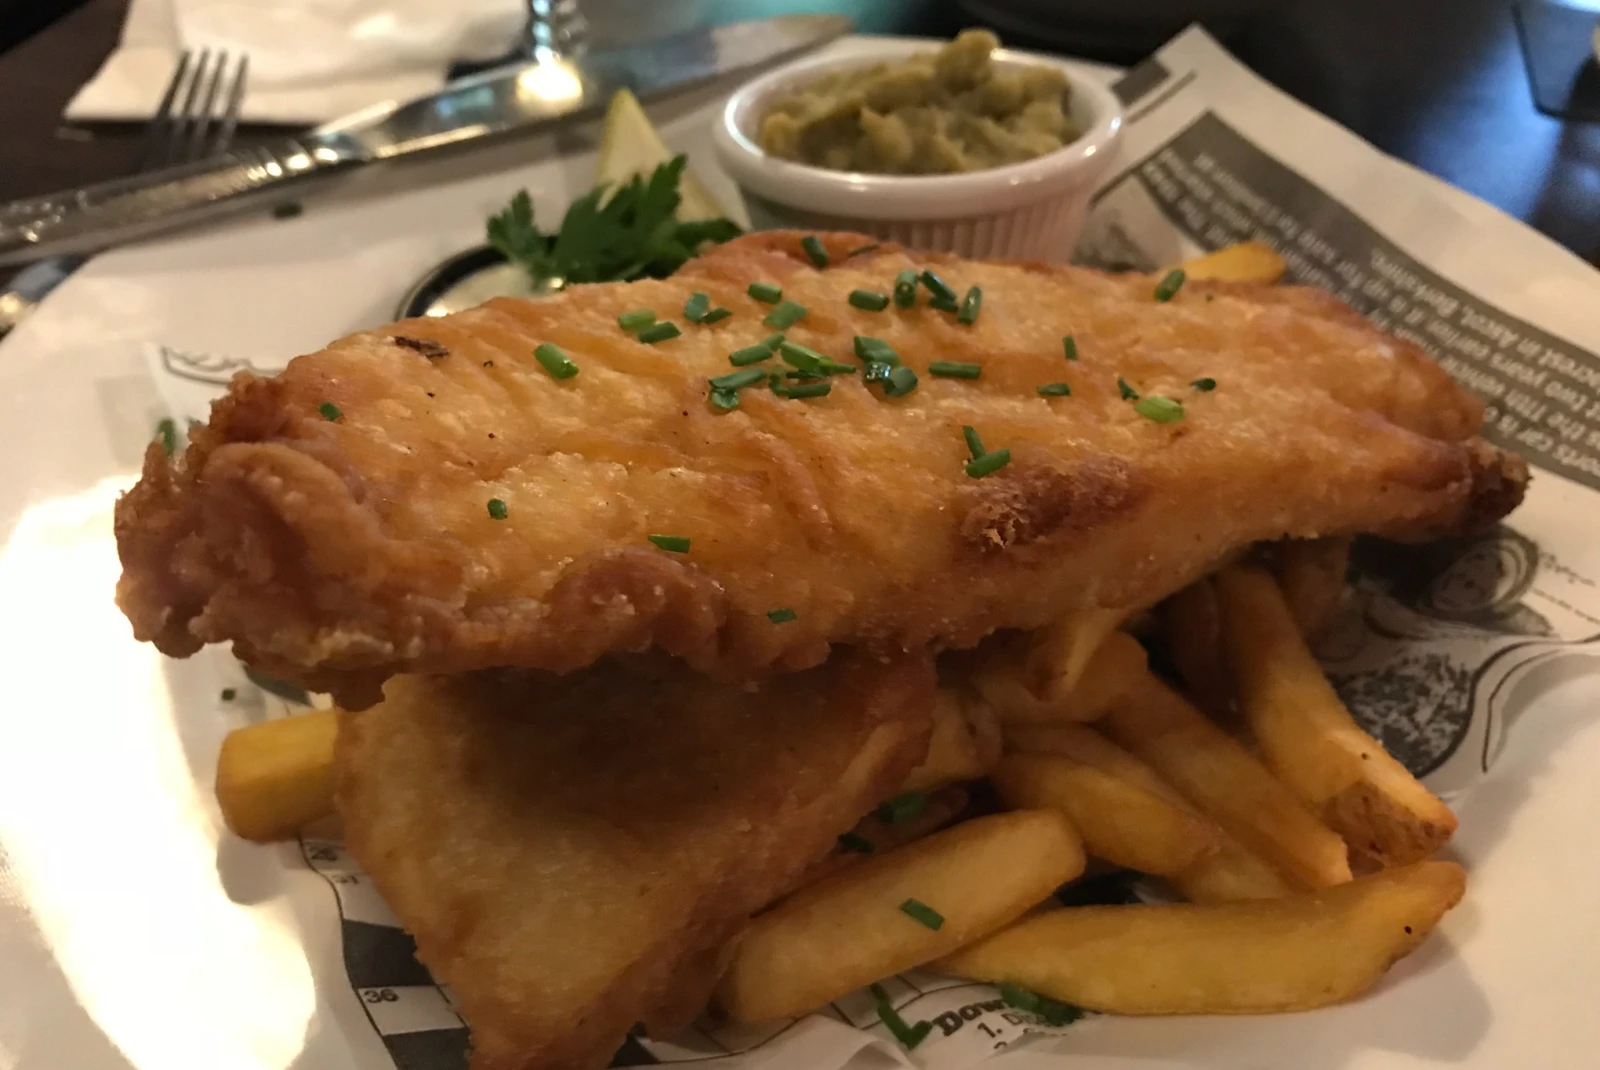 Fish & Chips is one of Dublin's local food favorites.